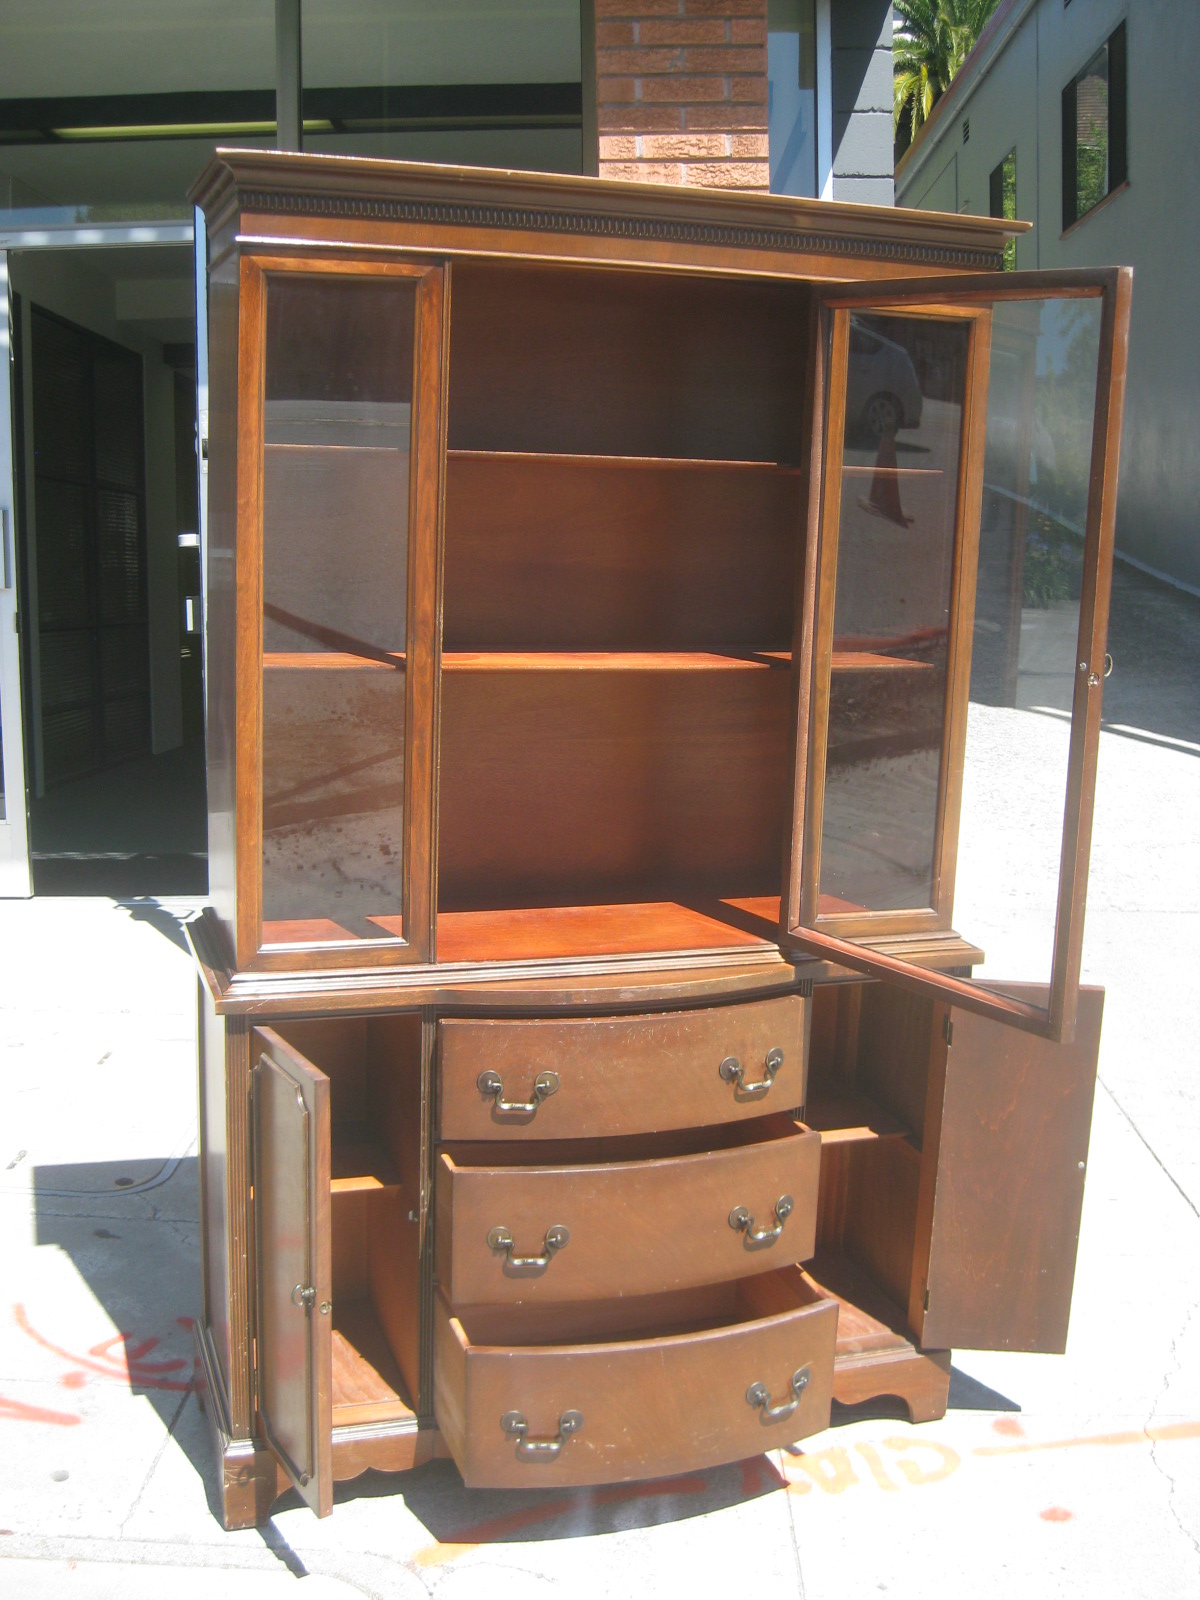 UHURU FURNITURE &amp; COLLECTIBLES: SOLD - Duncan Phyfe China Cabinet - $225